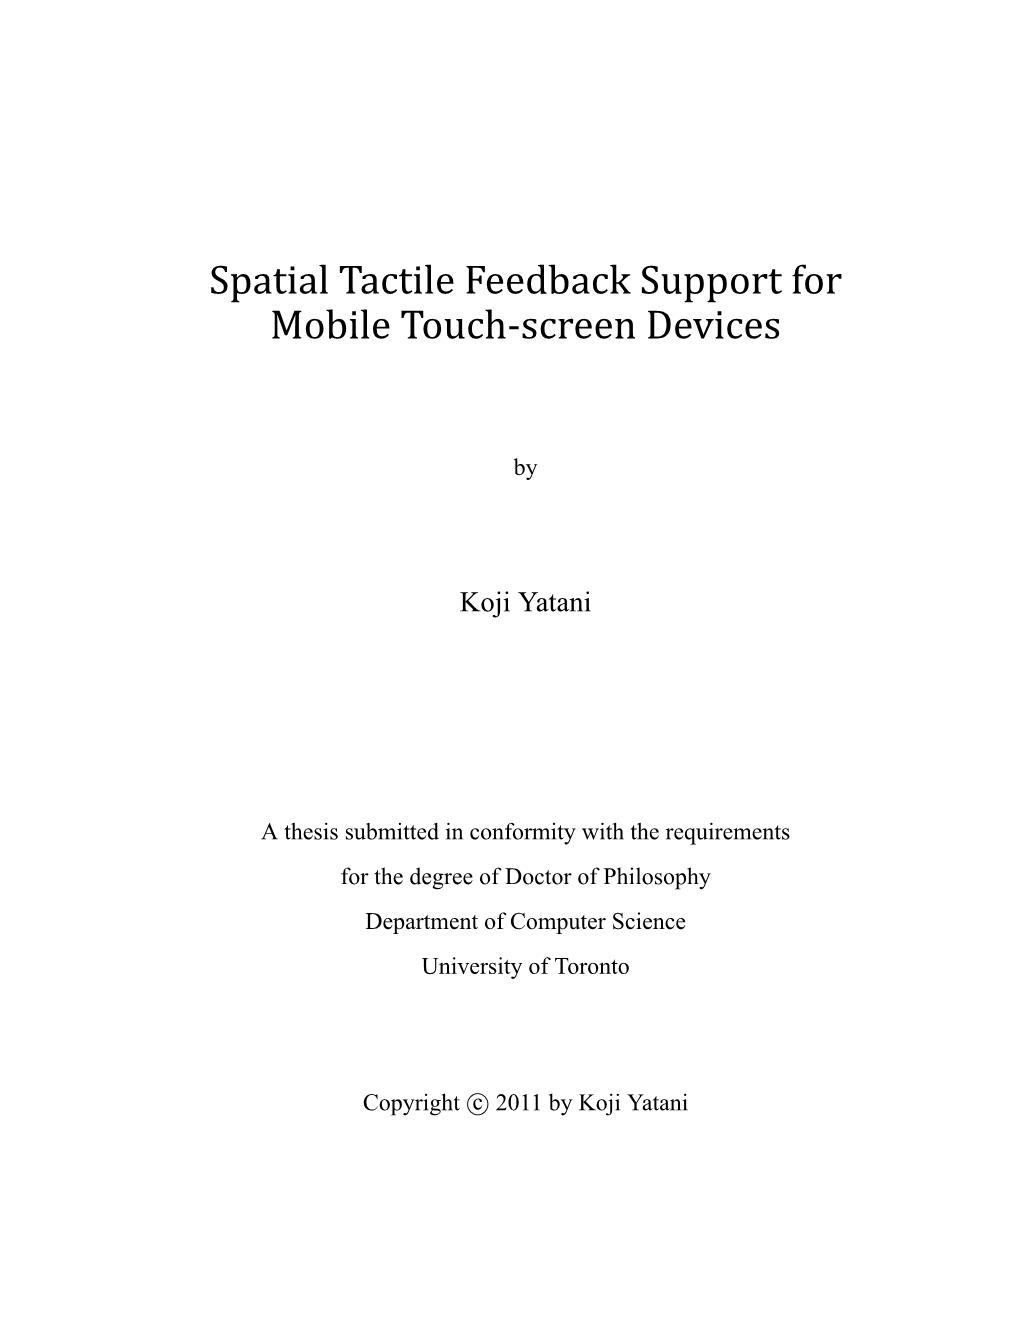 Spatial Tactile Feedback Support for Mobile Touch-Screen Devices